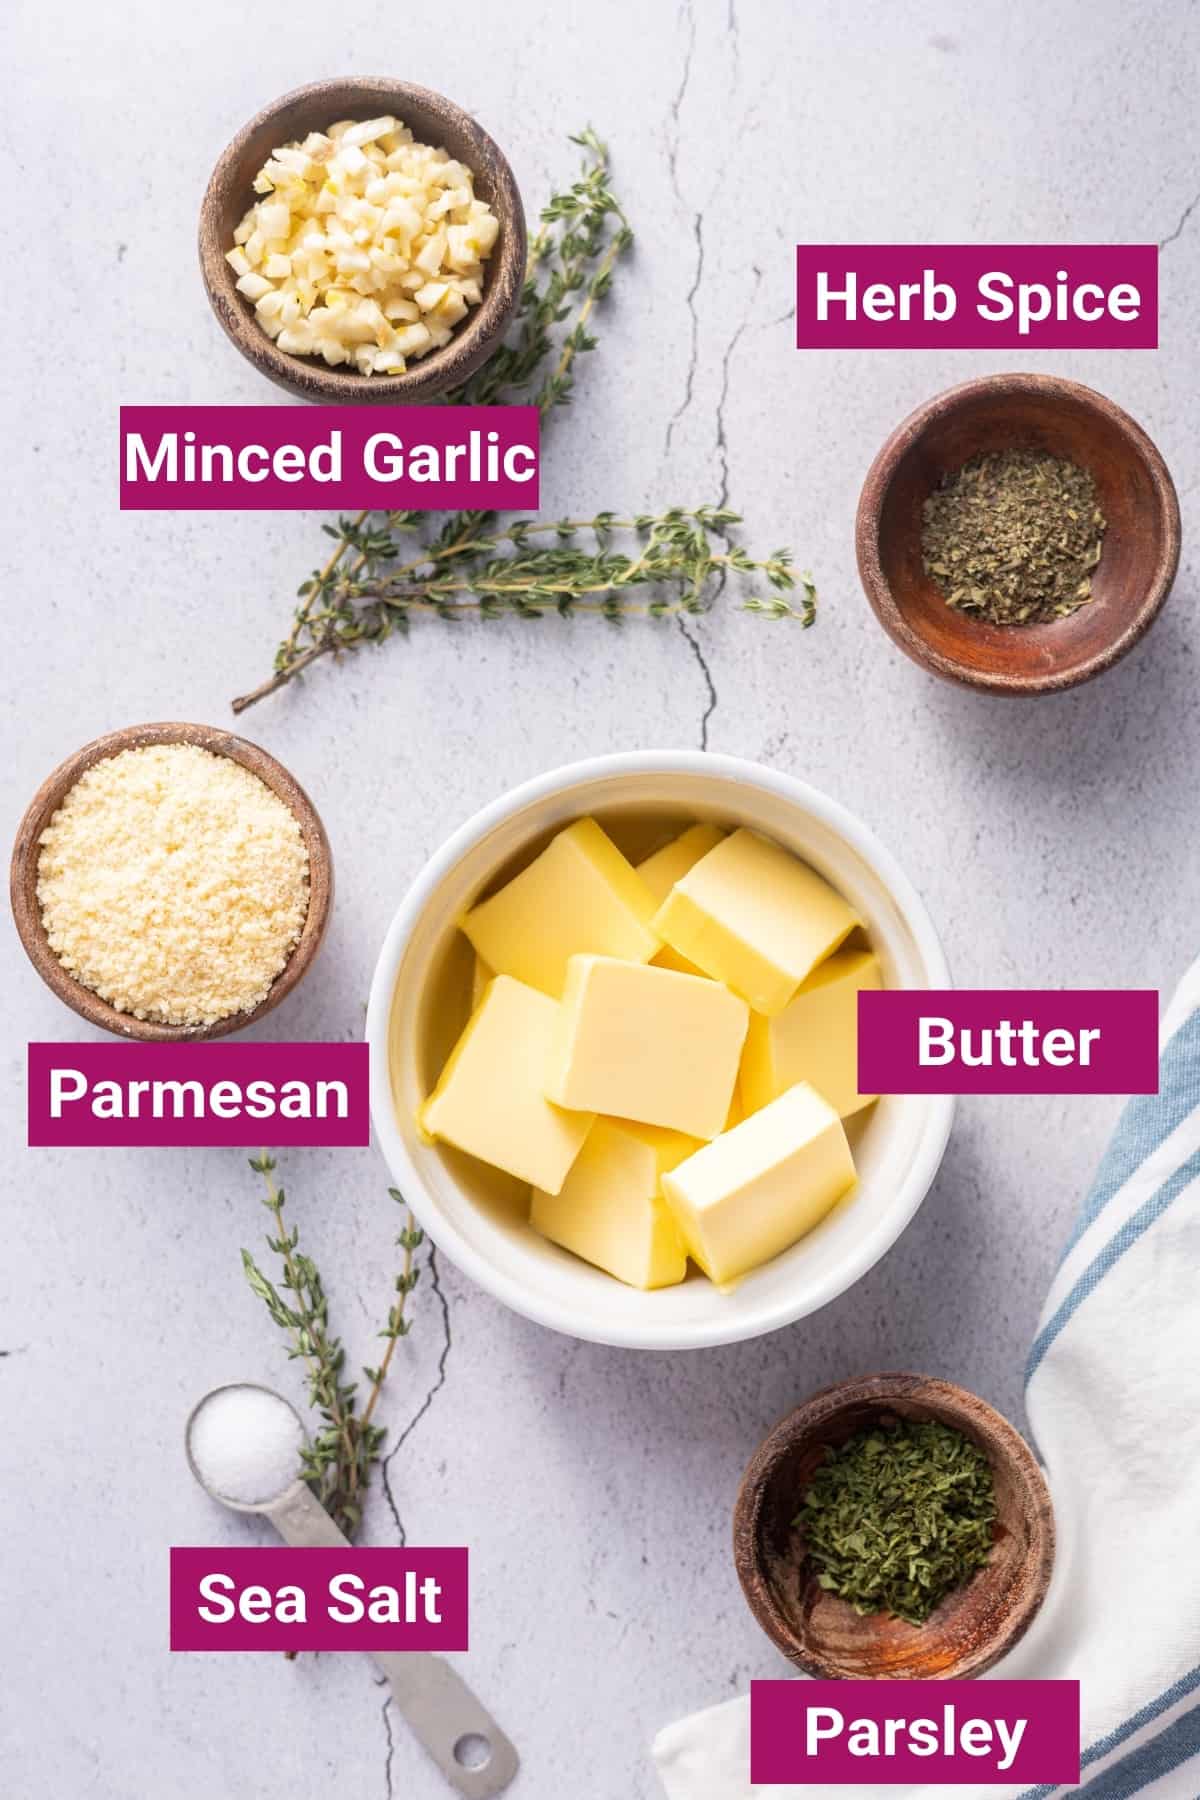 ingredients needed to make garlic herb butter for steak like salted butter, fresh herbs like parsley, salt, parmesan cheese, and minced garlic cloves.